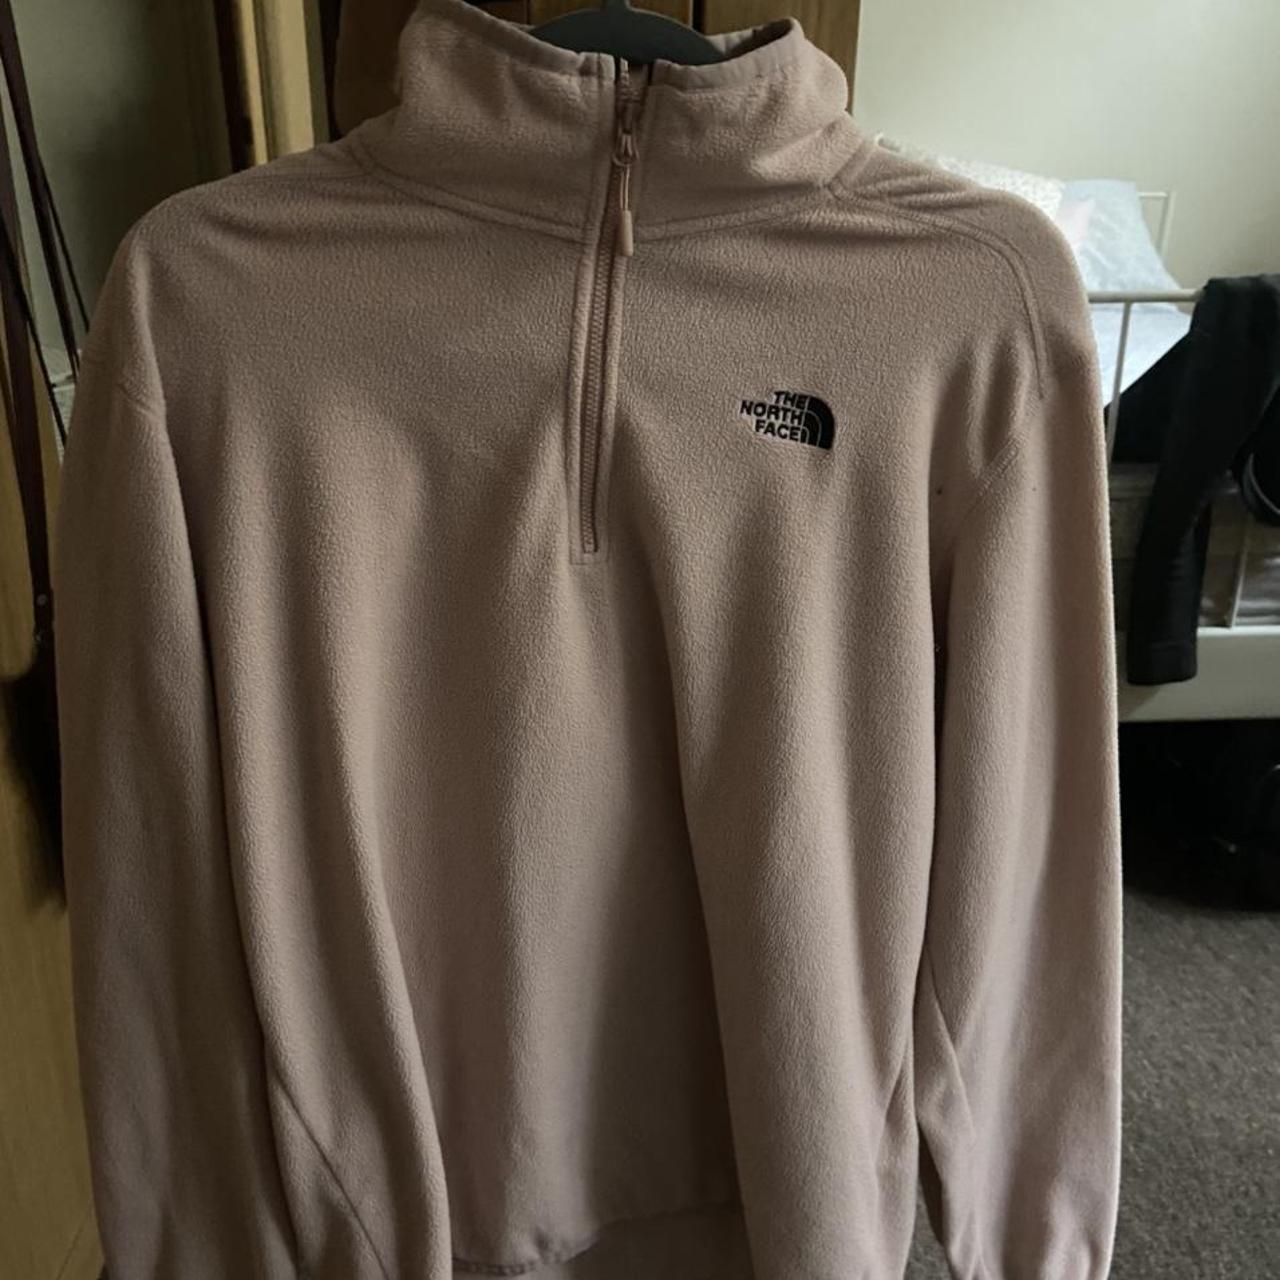 North face fleece light pink. Size small. Would fit... - Depop